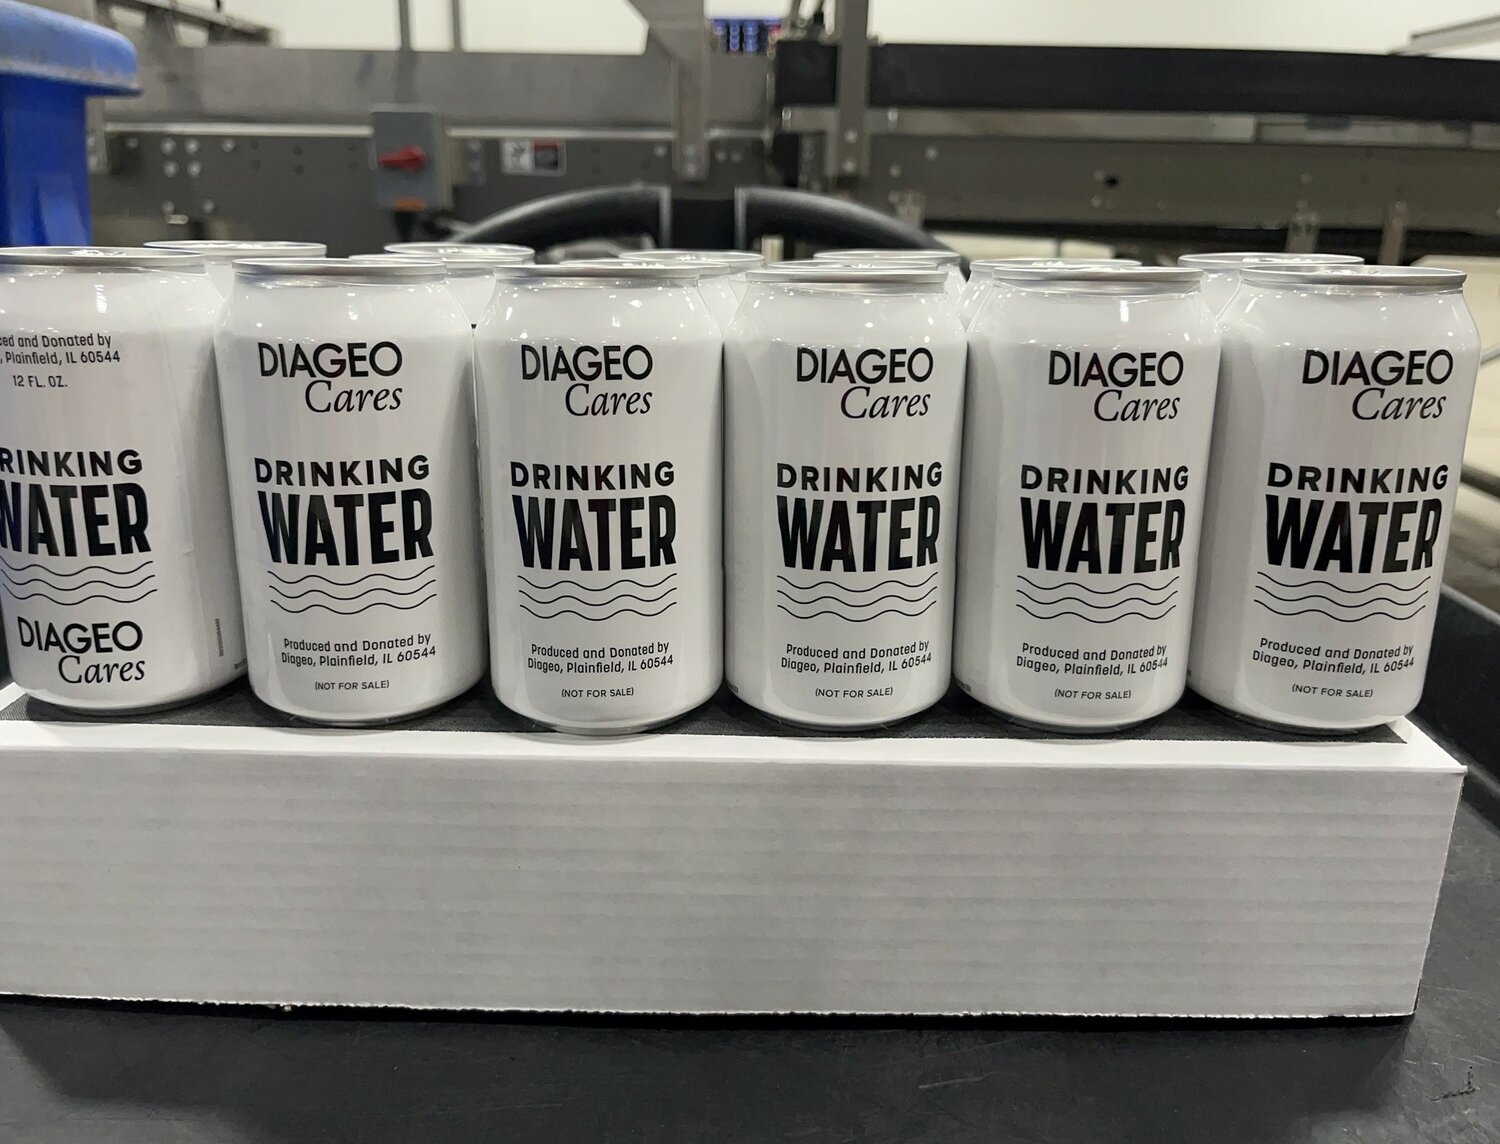 A gift of 10 million cans of water is being donated to Convoy of Hope by Diageo North America.